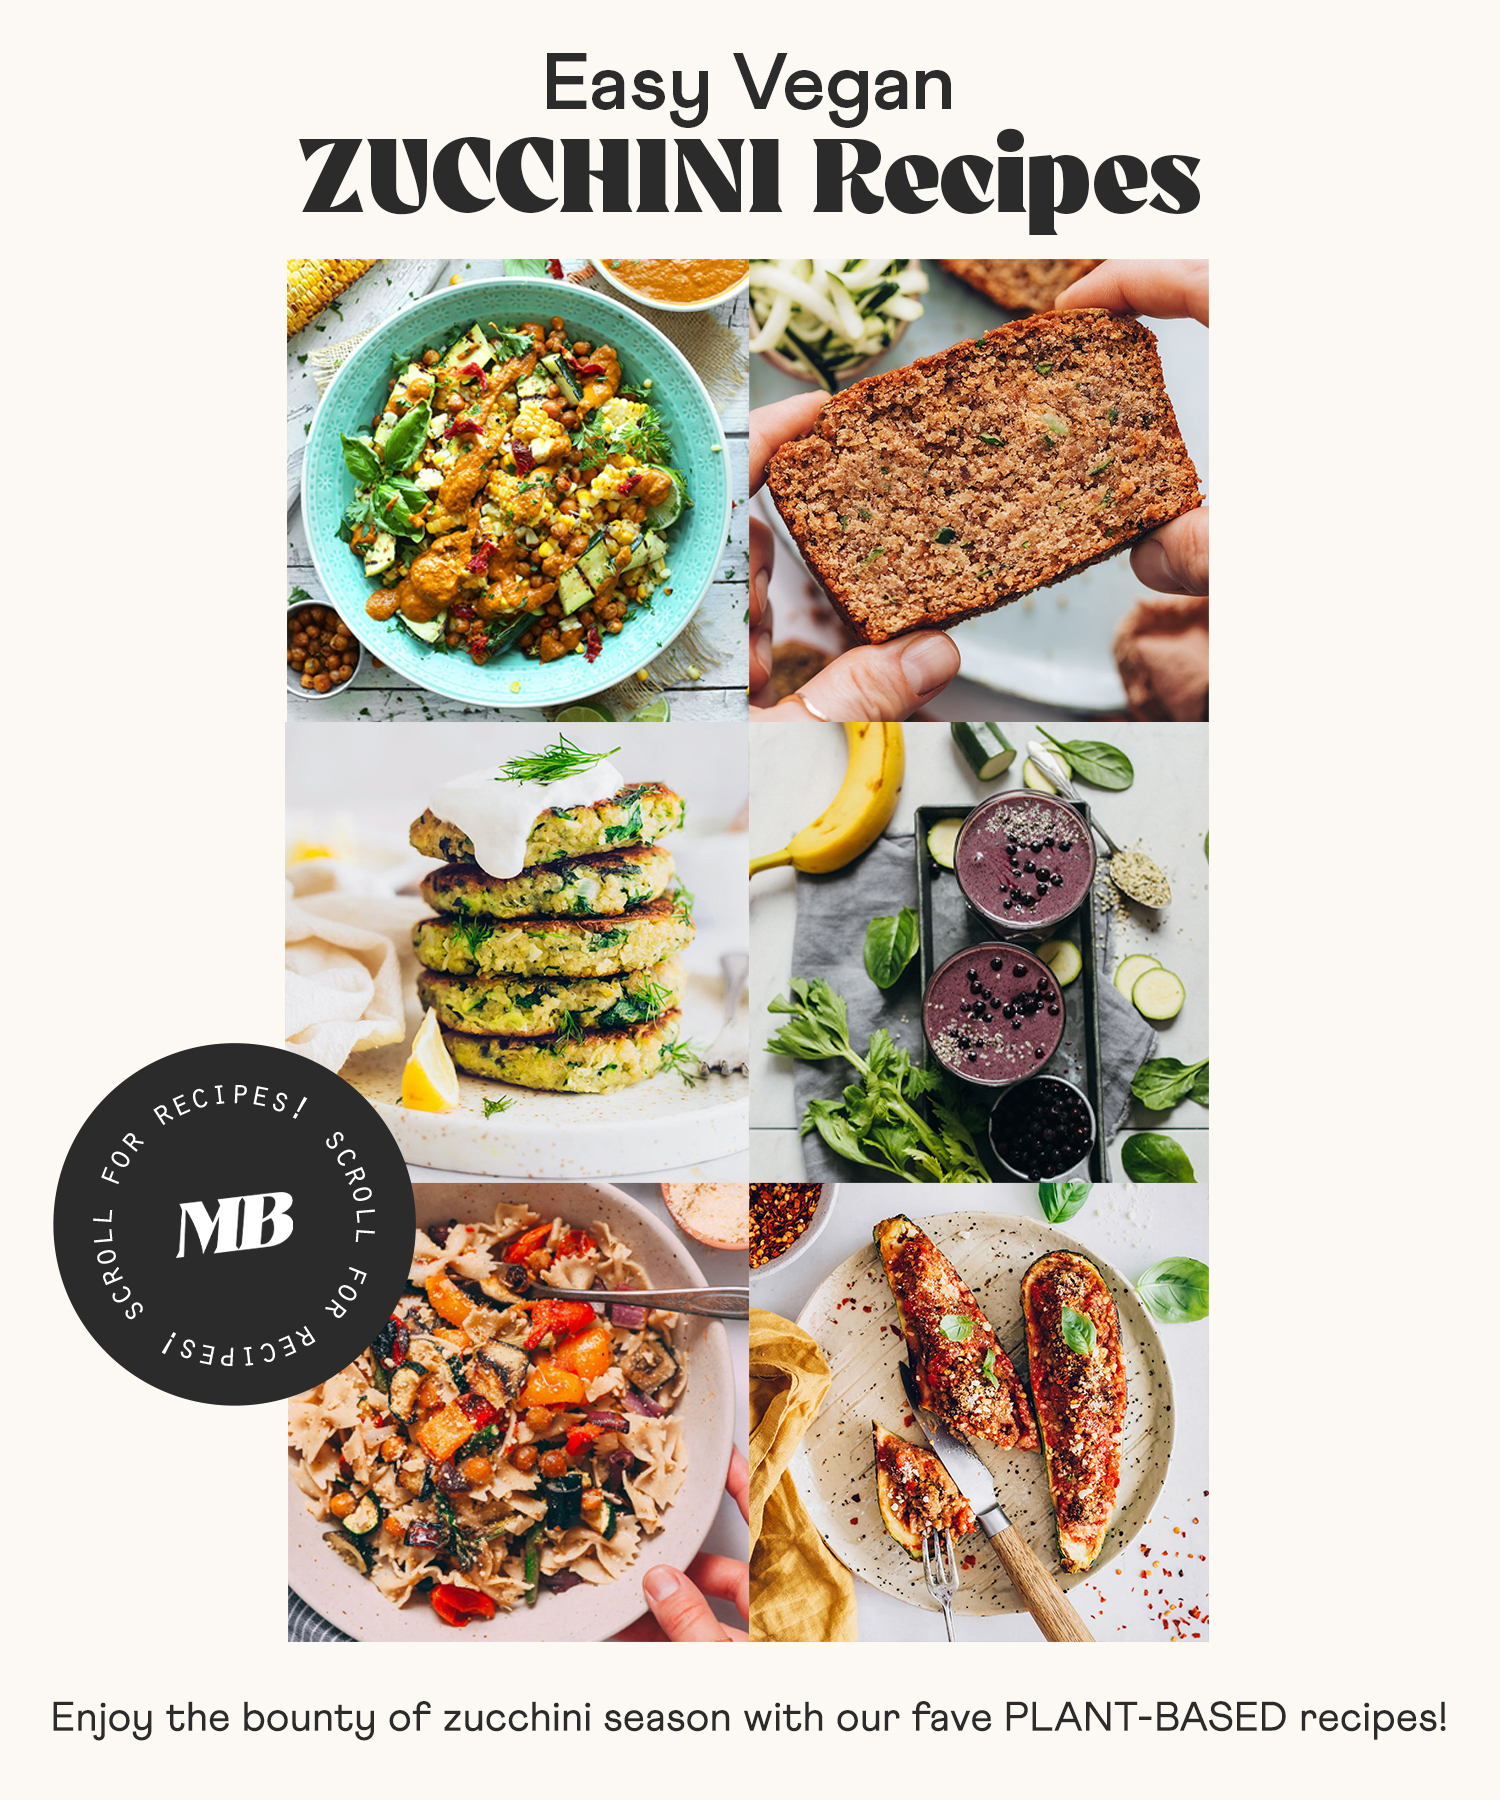 Photos of easy vegan zucchini recipes including pasta, salad, zucchini bread, and more